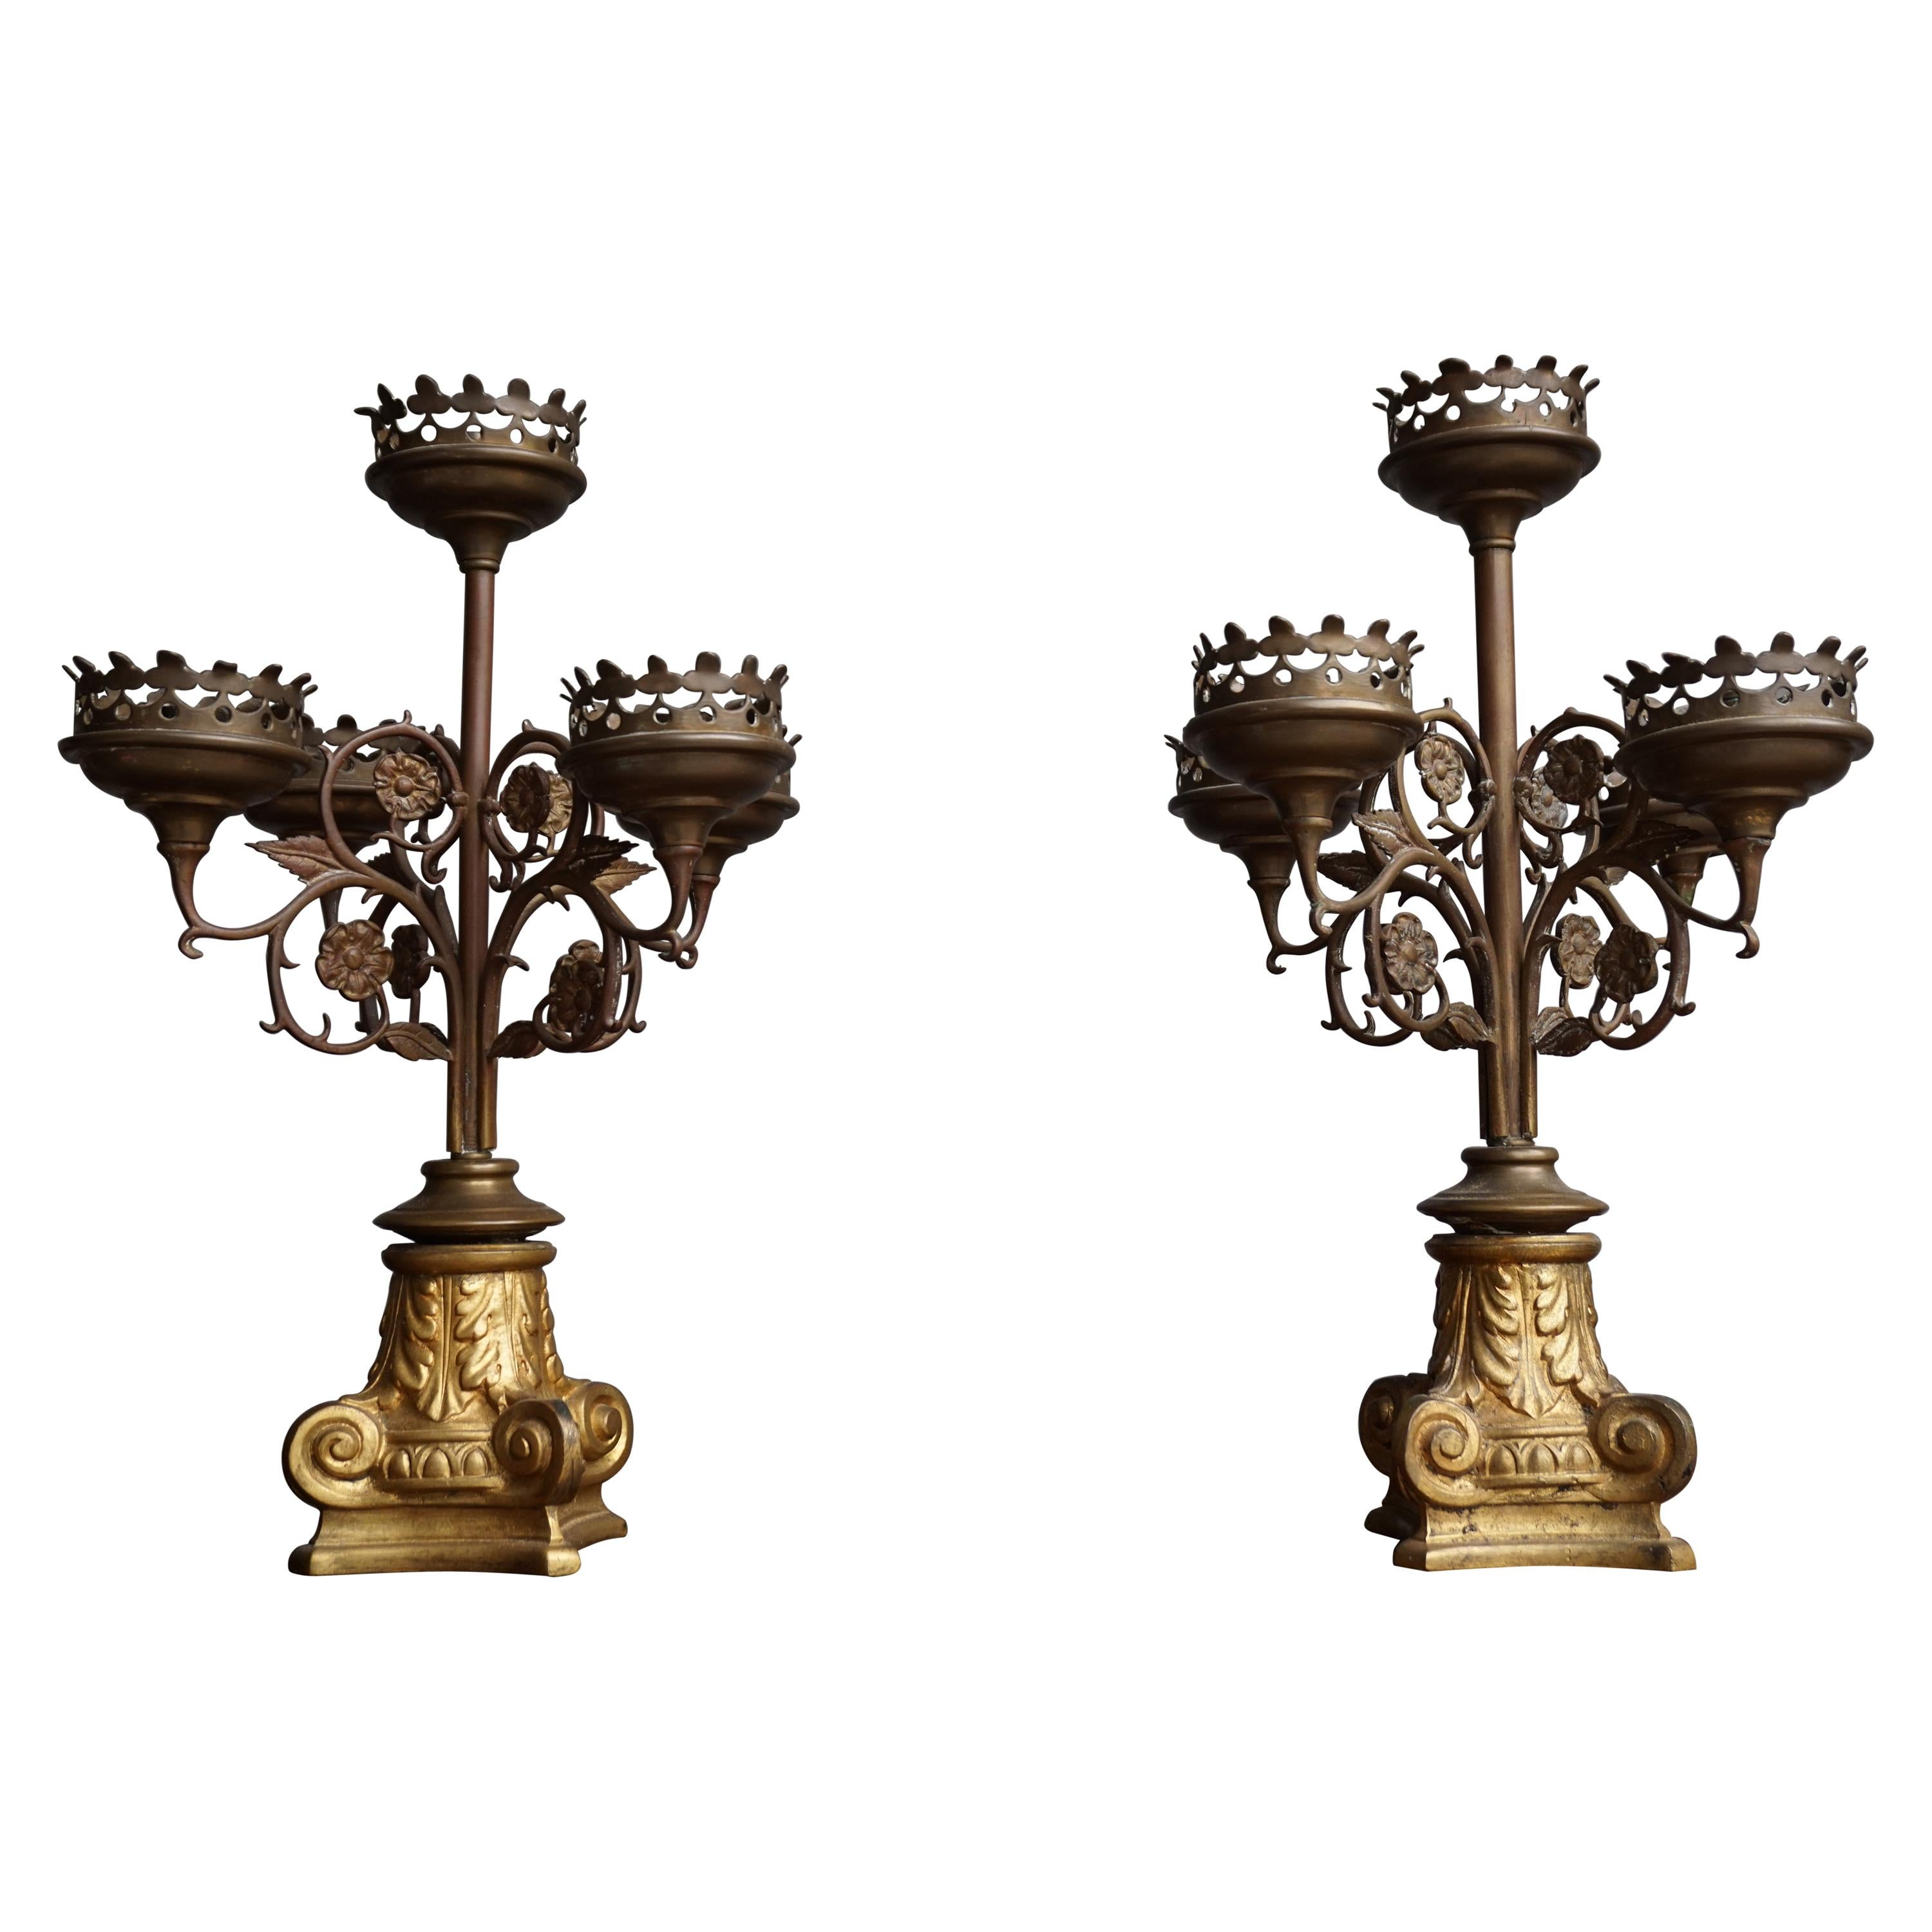 Antique Gothic Revival Pair of Bronze & Brass Table Candelabras / Candle Stands